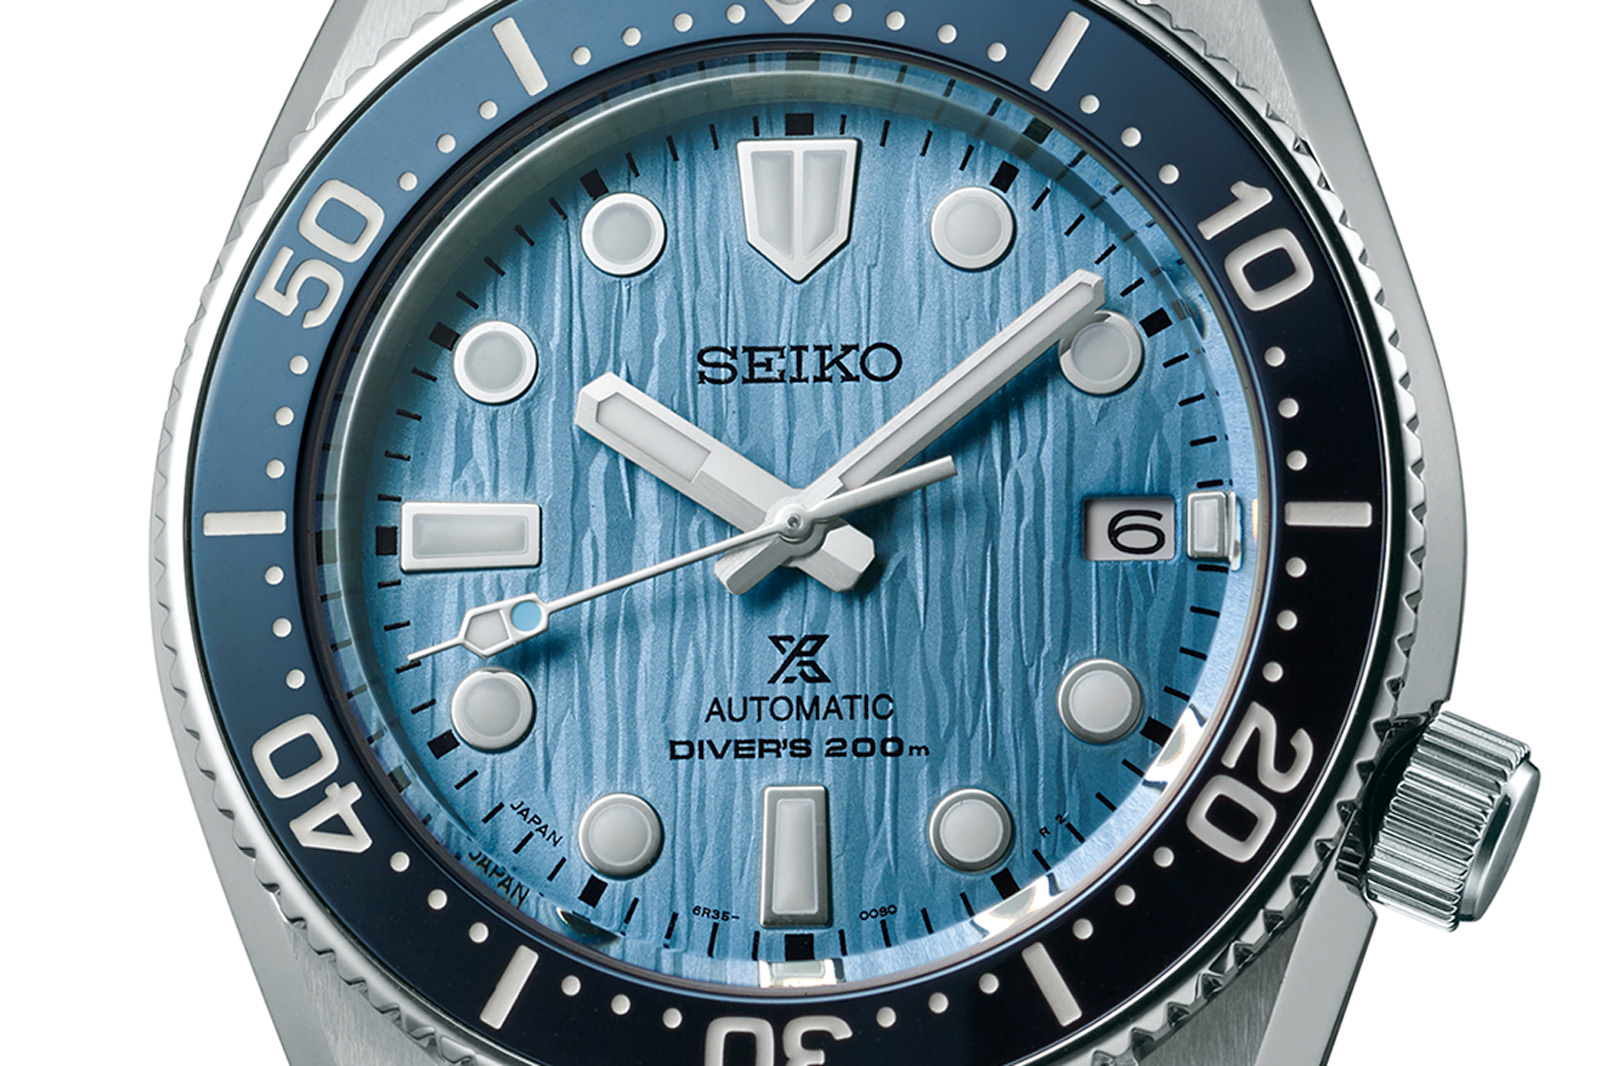 Seiko Debuts Prospex Dive Watches with “Glacial Ice” Dials | SJX Watches